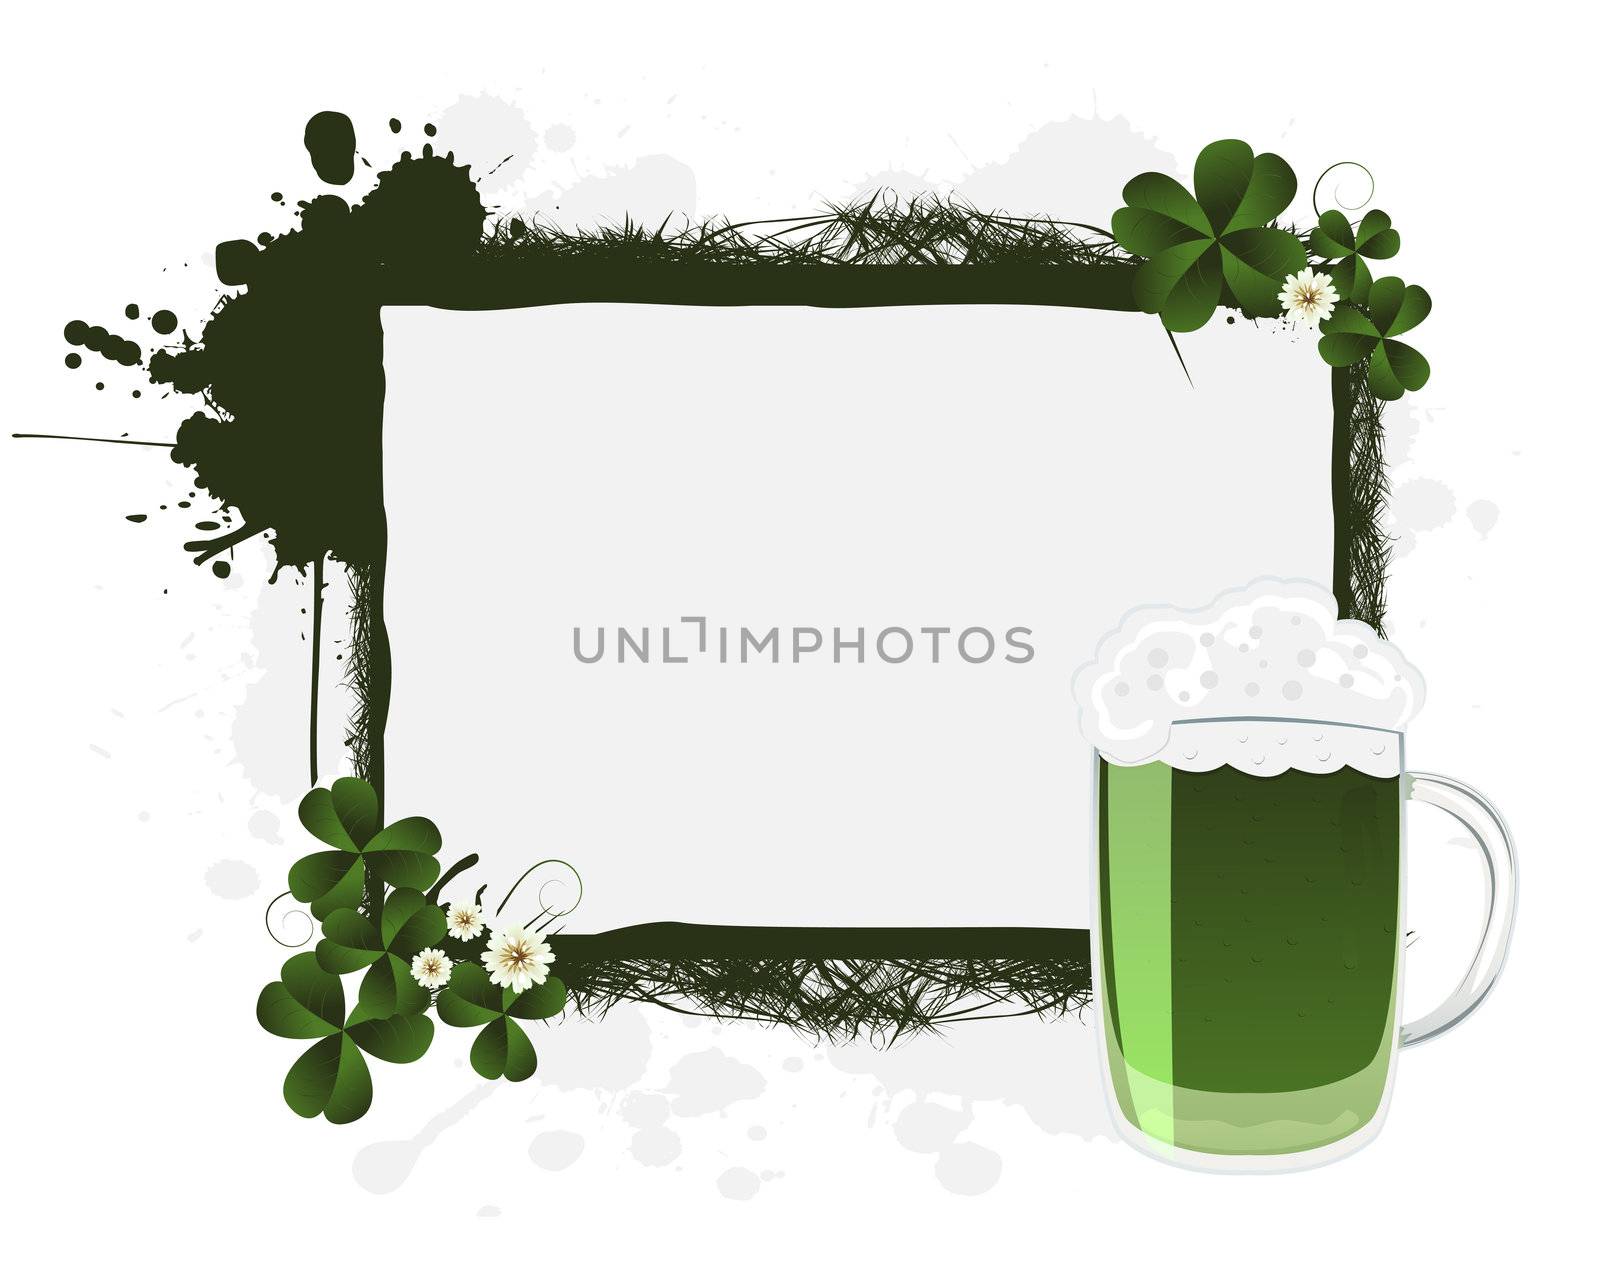 St. Patrick's green beer and clovers, banner